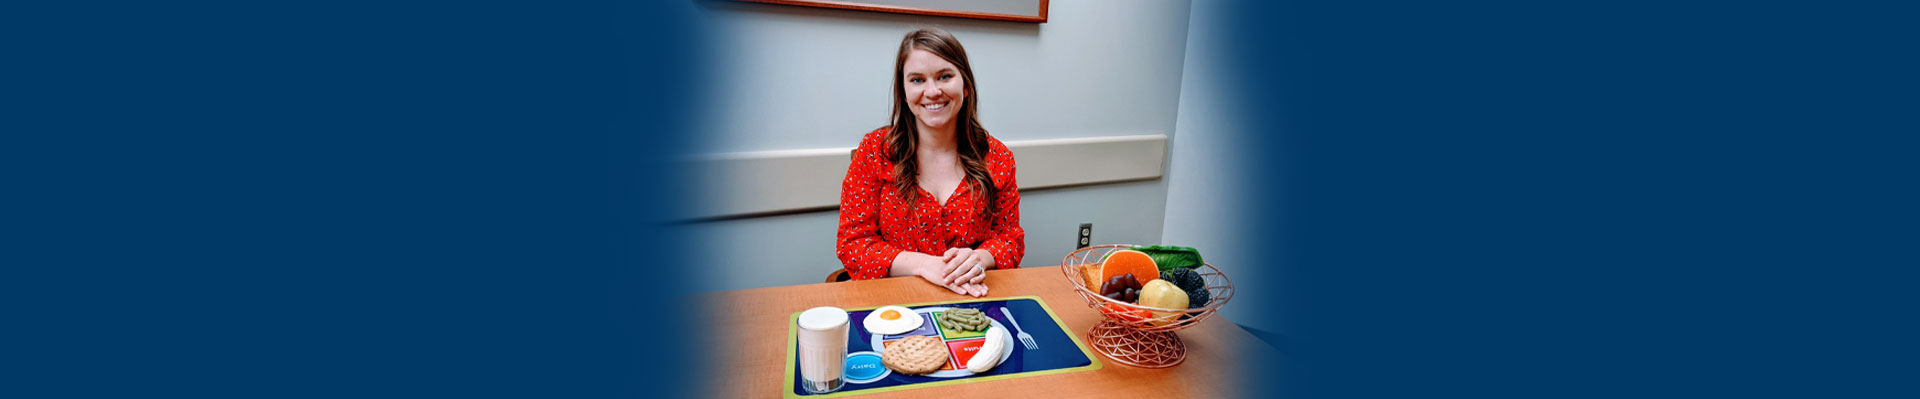 Banner picture of a female Dietician  sitting at a table with a placement mat with a plate prin with milk, an egg, green beans, a banana, bread and a basket sitting next to her full of fruit.
Dietitian Services